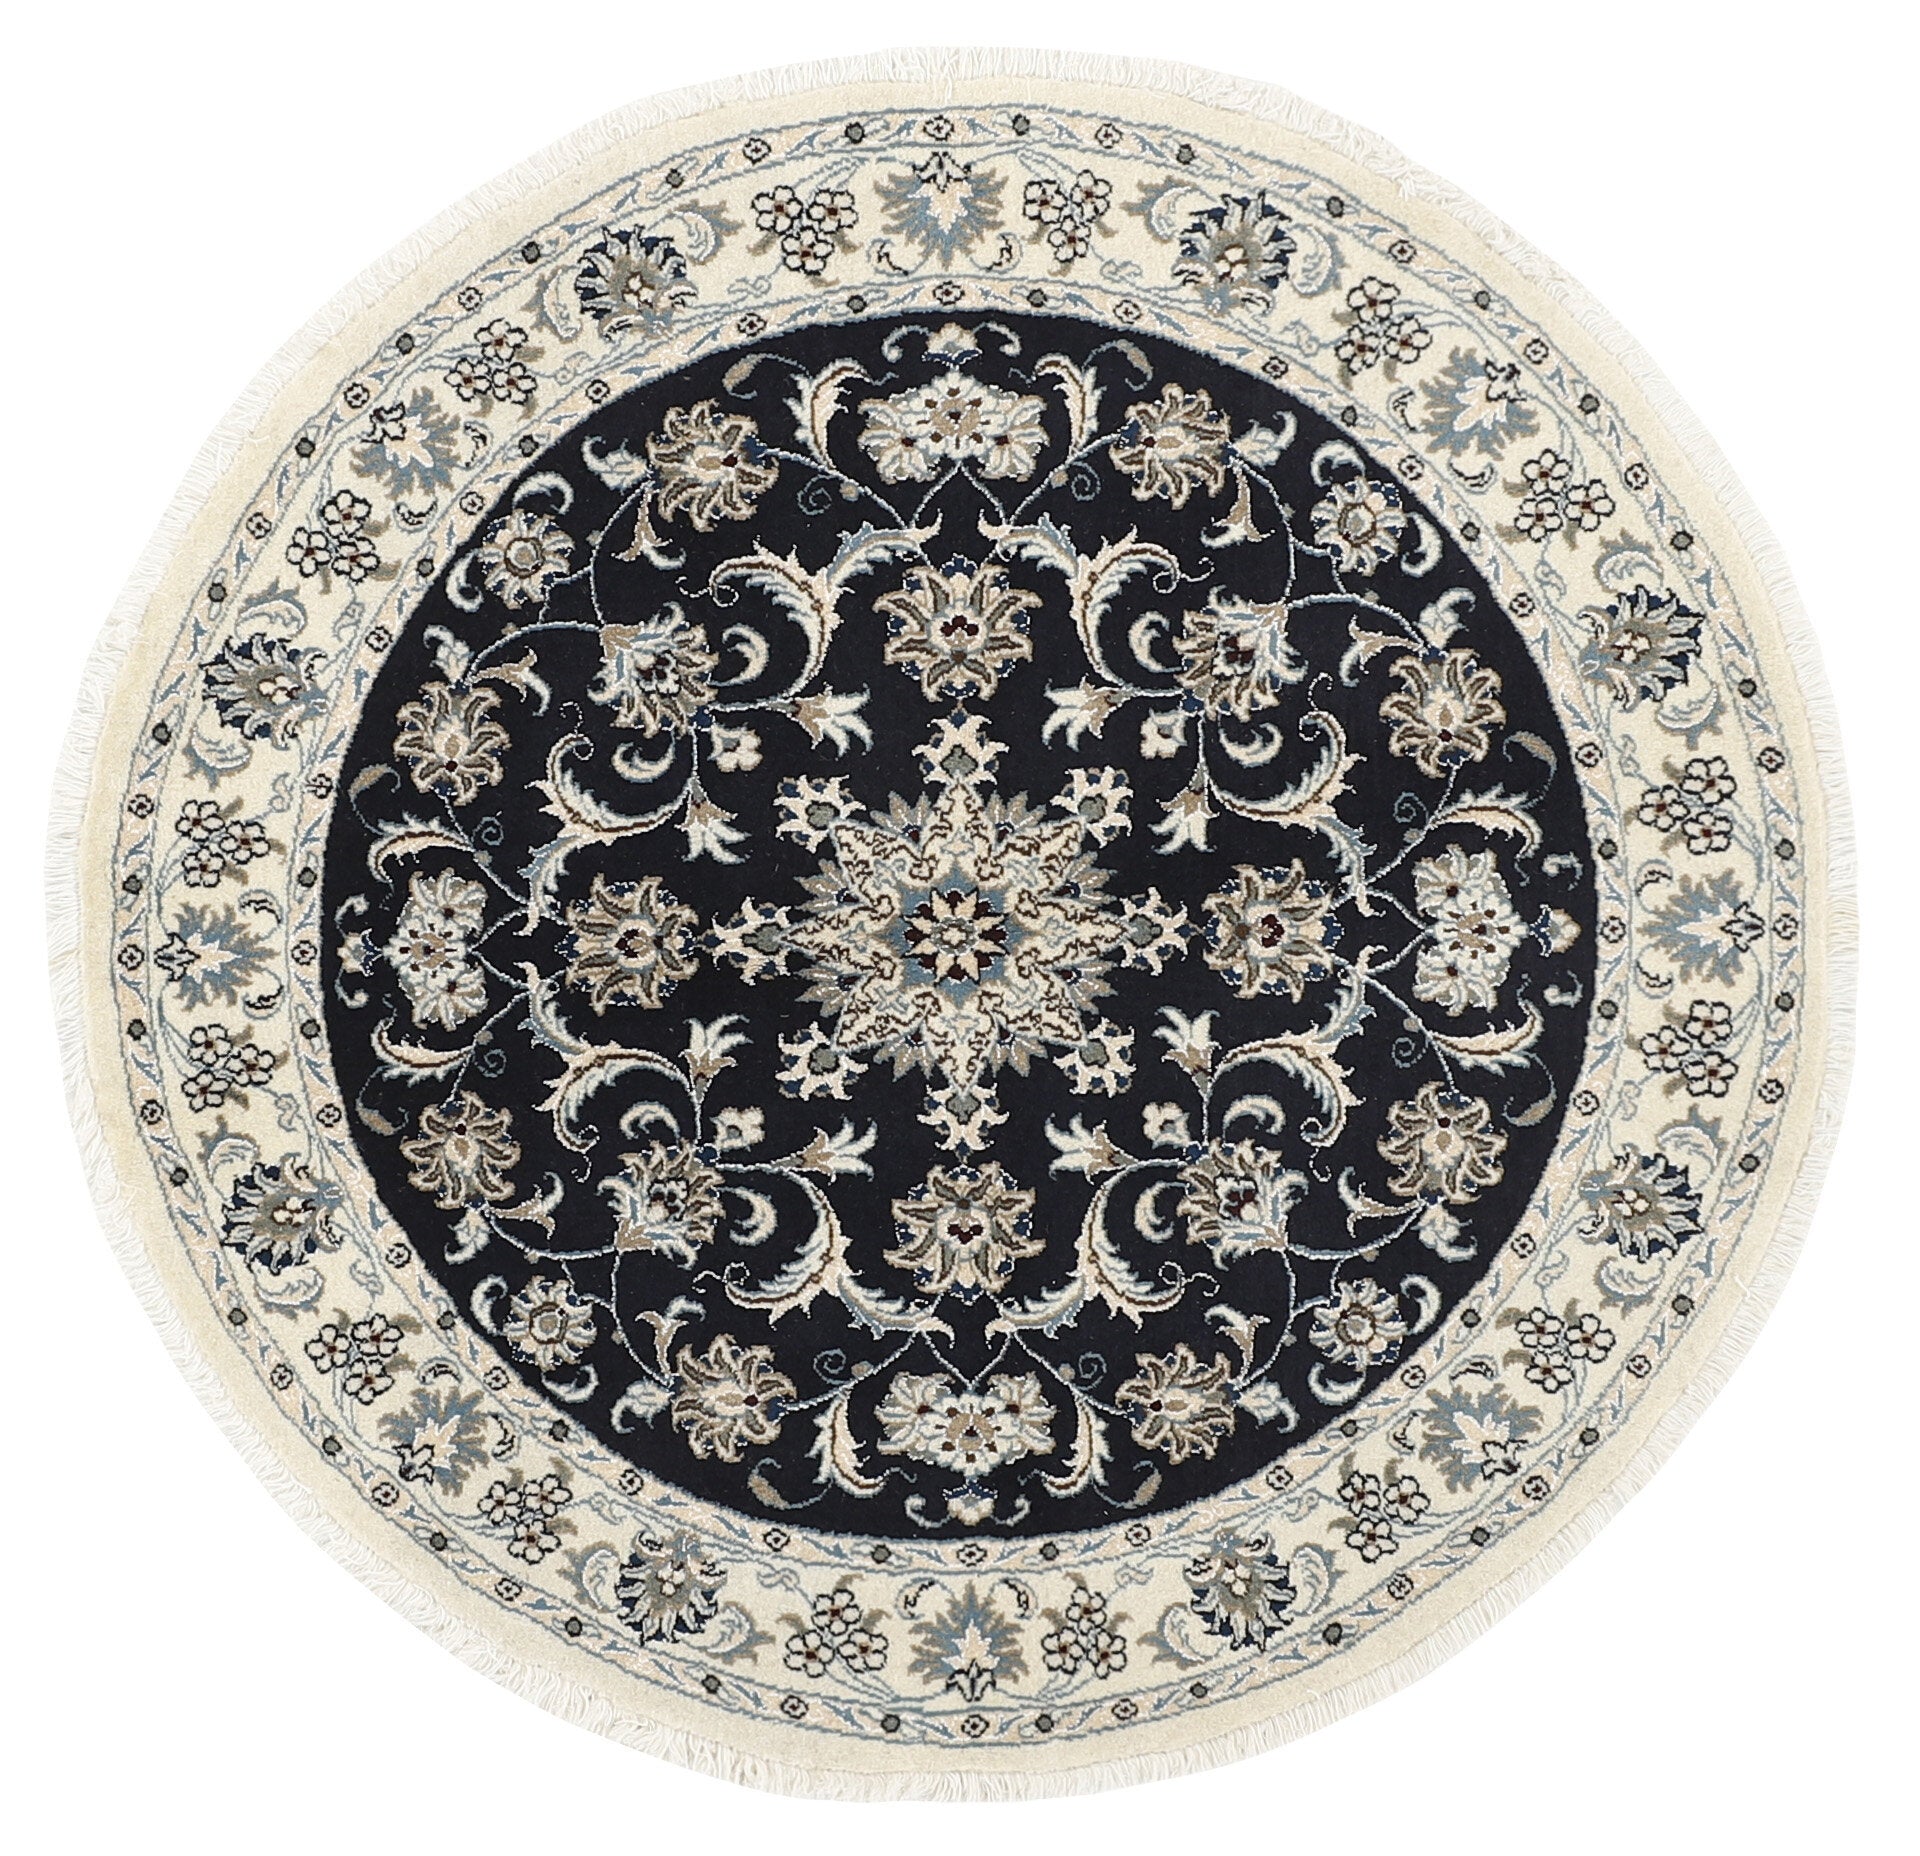 Authentic persian rug with a traditional floral design in cream, blue, beige, brown and black